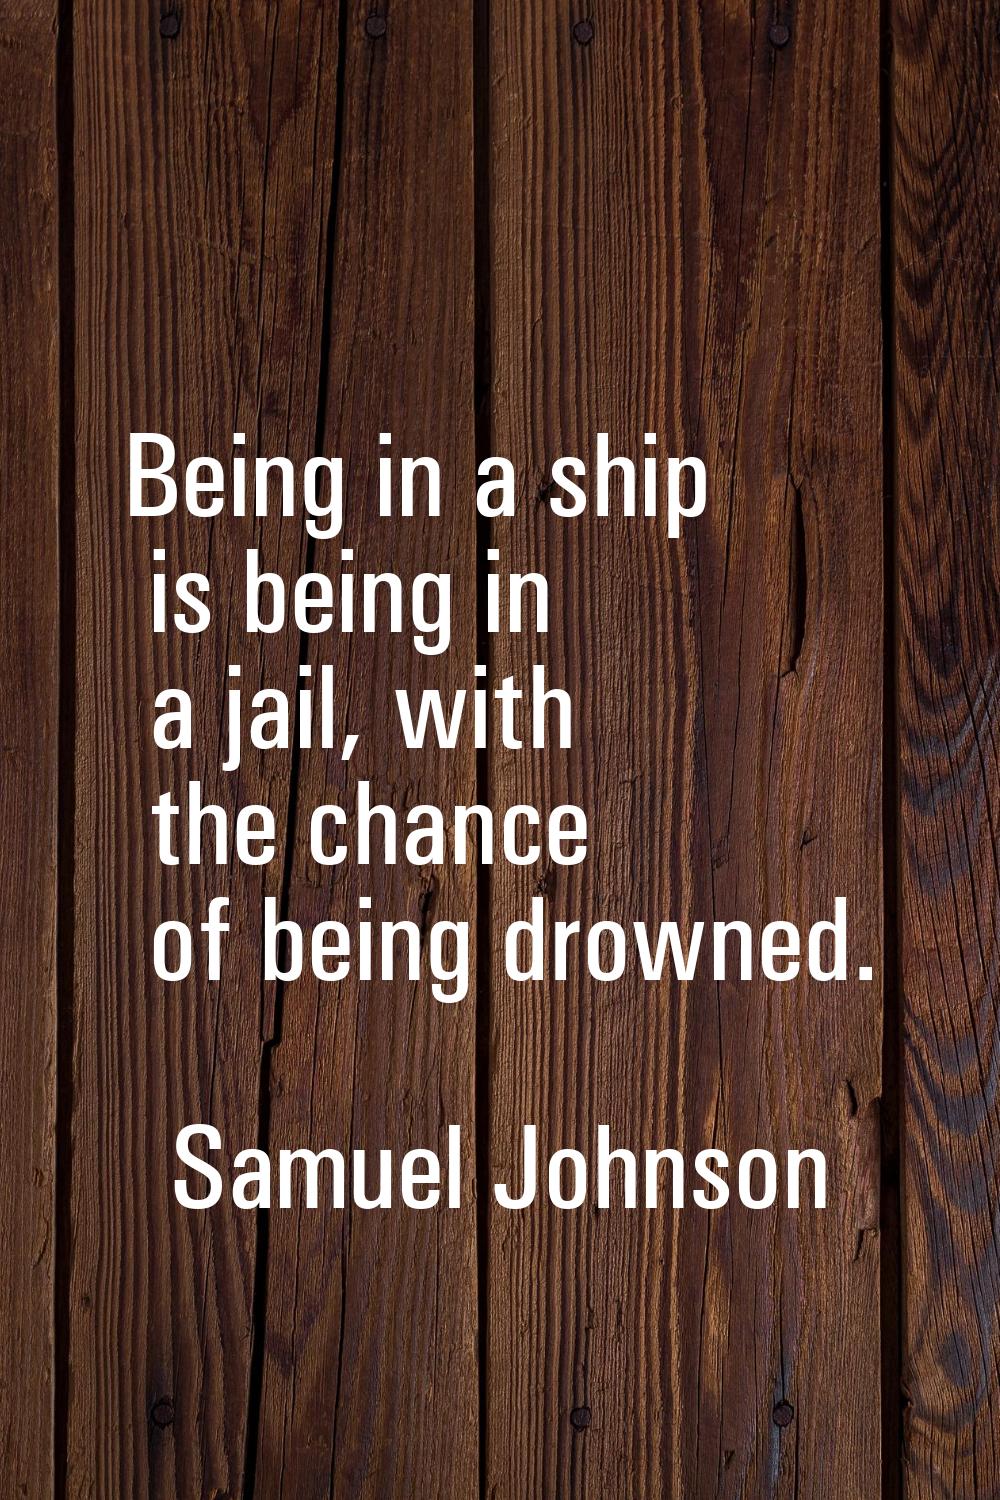 Being in a ship is being in a jail, with the chance of being drowned.